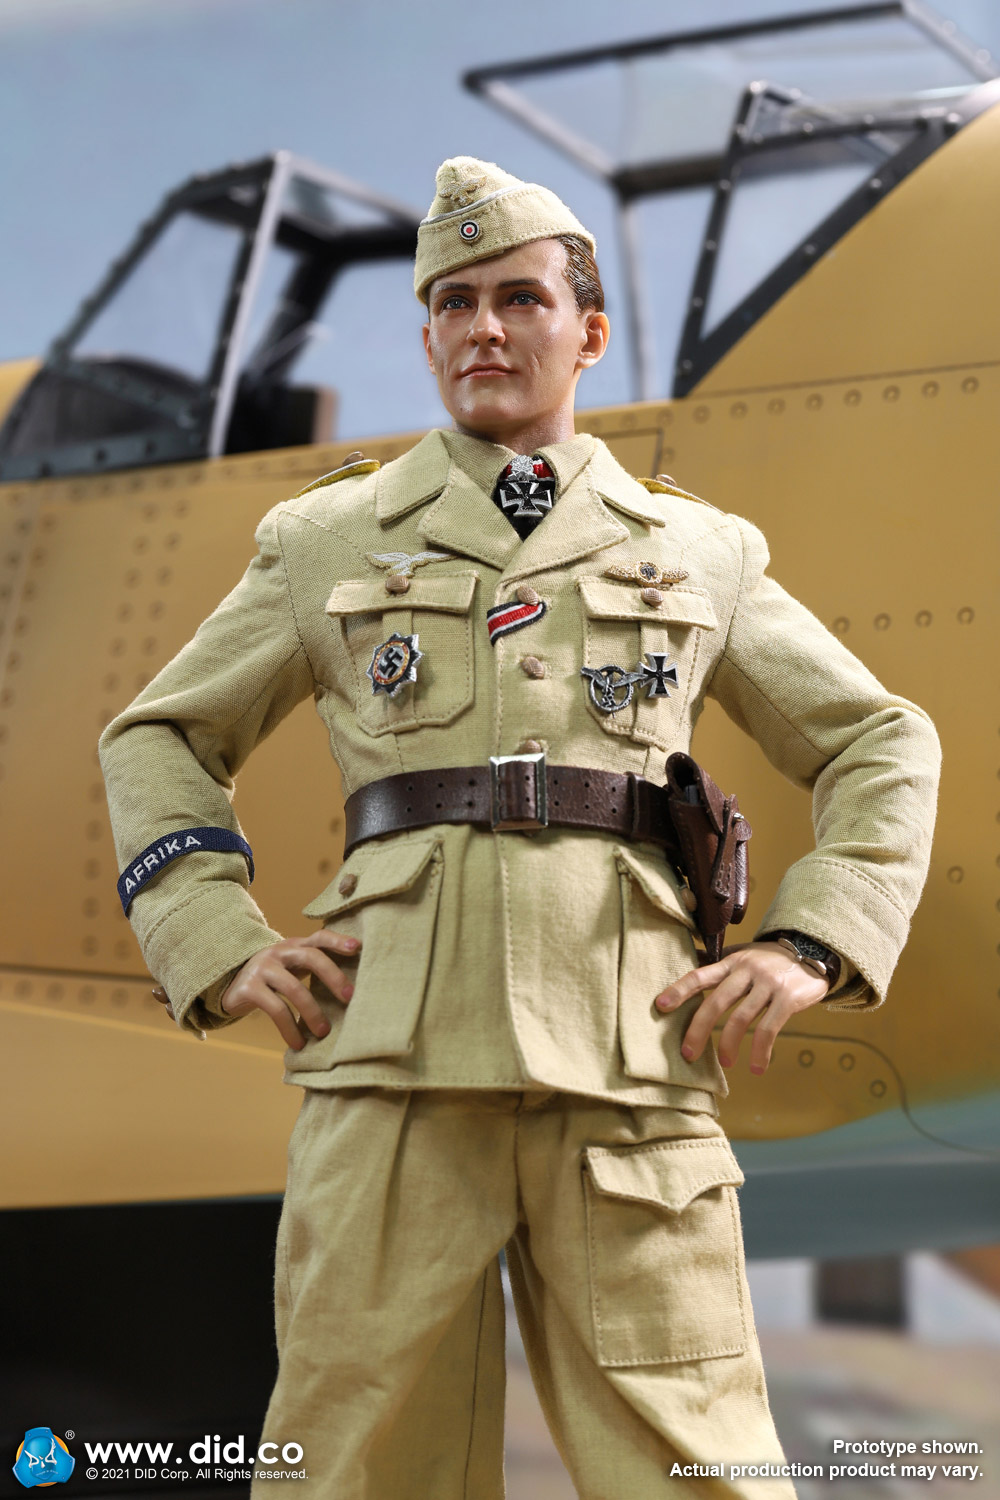 NEW PRODUCT: D80154 WWII German Luftwaffe Flying Ace “Star Of Africa” – Hans-Joachim Marseille & E60060  Diorama Of “Star Of Africa” 10404